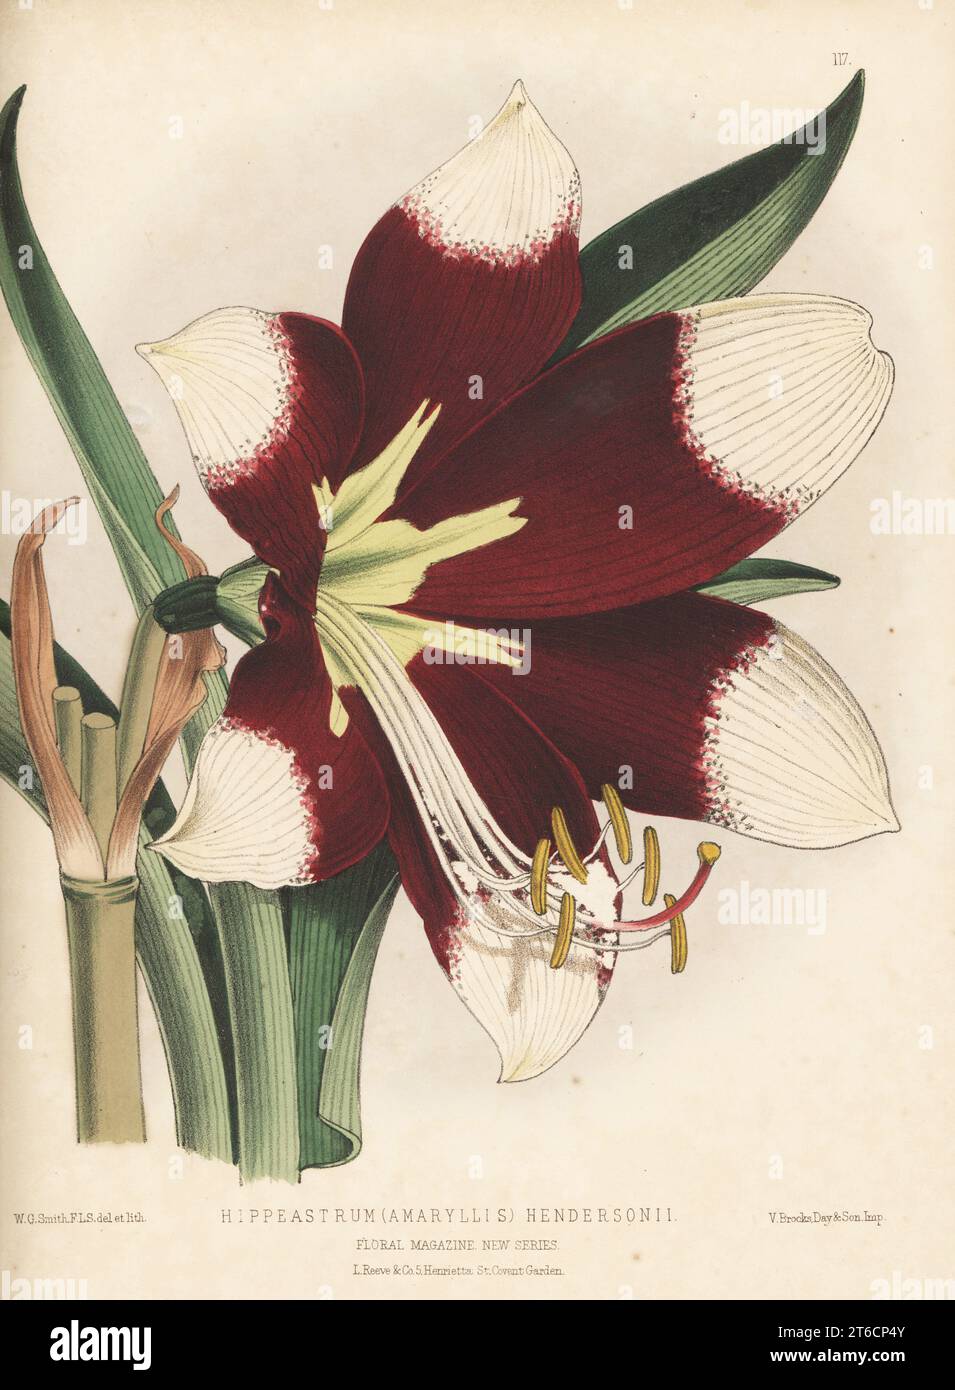 Henderson's amaryllis cultivar, Hippeastrum (Amaryllis) hendersonii. Raised by Edward George Henderson and Son, Wellington Nurseries, St. John's Wood. Handcolored botanical illustration drawn and lithographed by Worthington George Smith from Henry Honywood Dombrain's Floral Magazine, New Series, Volume 3, L. Reeve, London, 1874. Lithograph printed by Vincent Brooks, Day & Son. Stock Photo